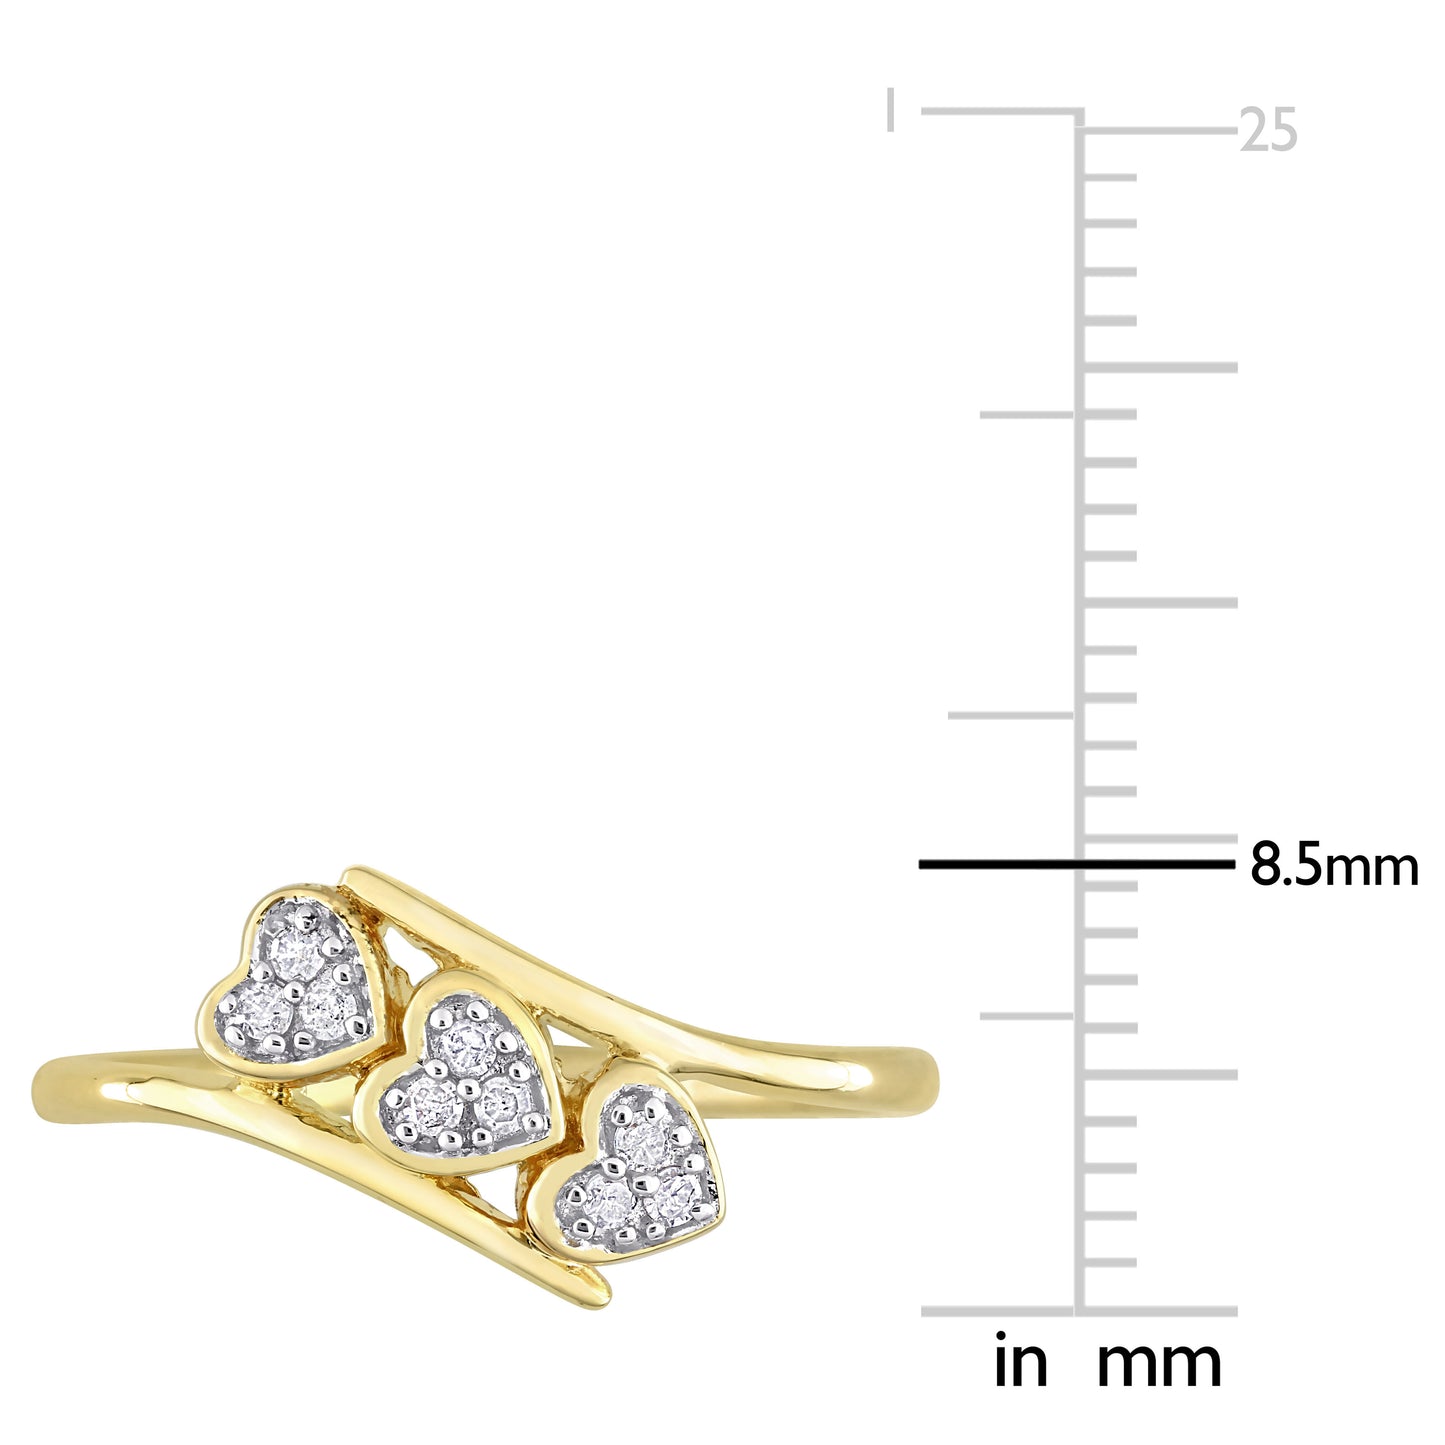 Triple Heart Diamond Ring in 18K Yellow Gold Plated